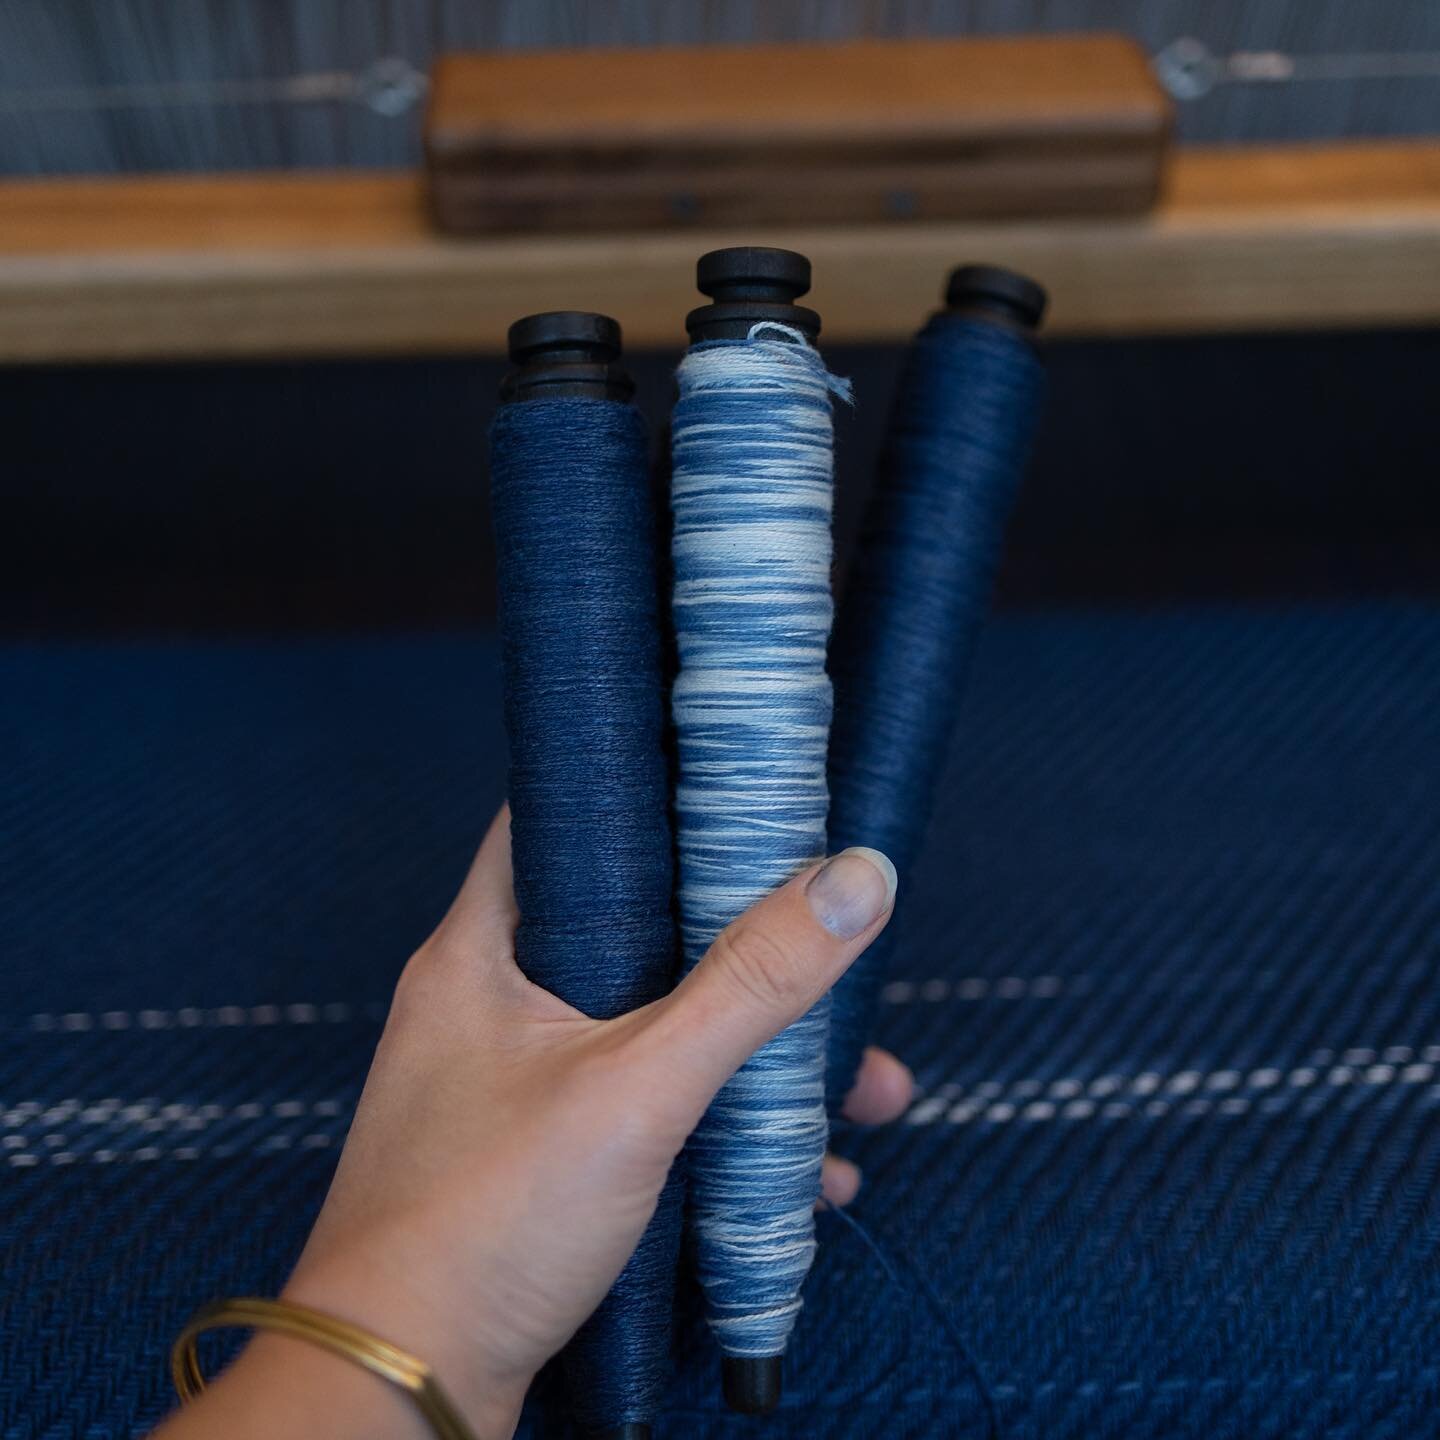 Bobbins &bull; Hand dyed organic cotton combined with blue linnen. I dyed these yarns a while back in our garden using my indigo vat. Now i am finally getting to weave with them and discover the patterns they make in the cloth. A technique loosely re